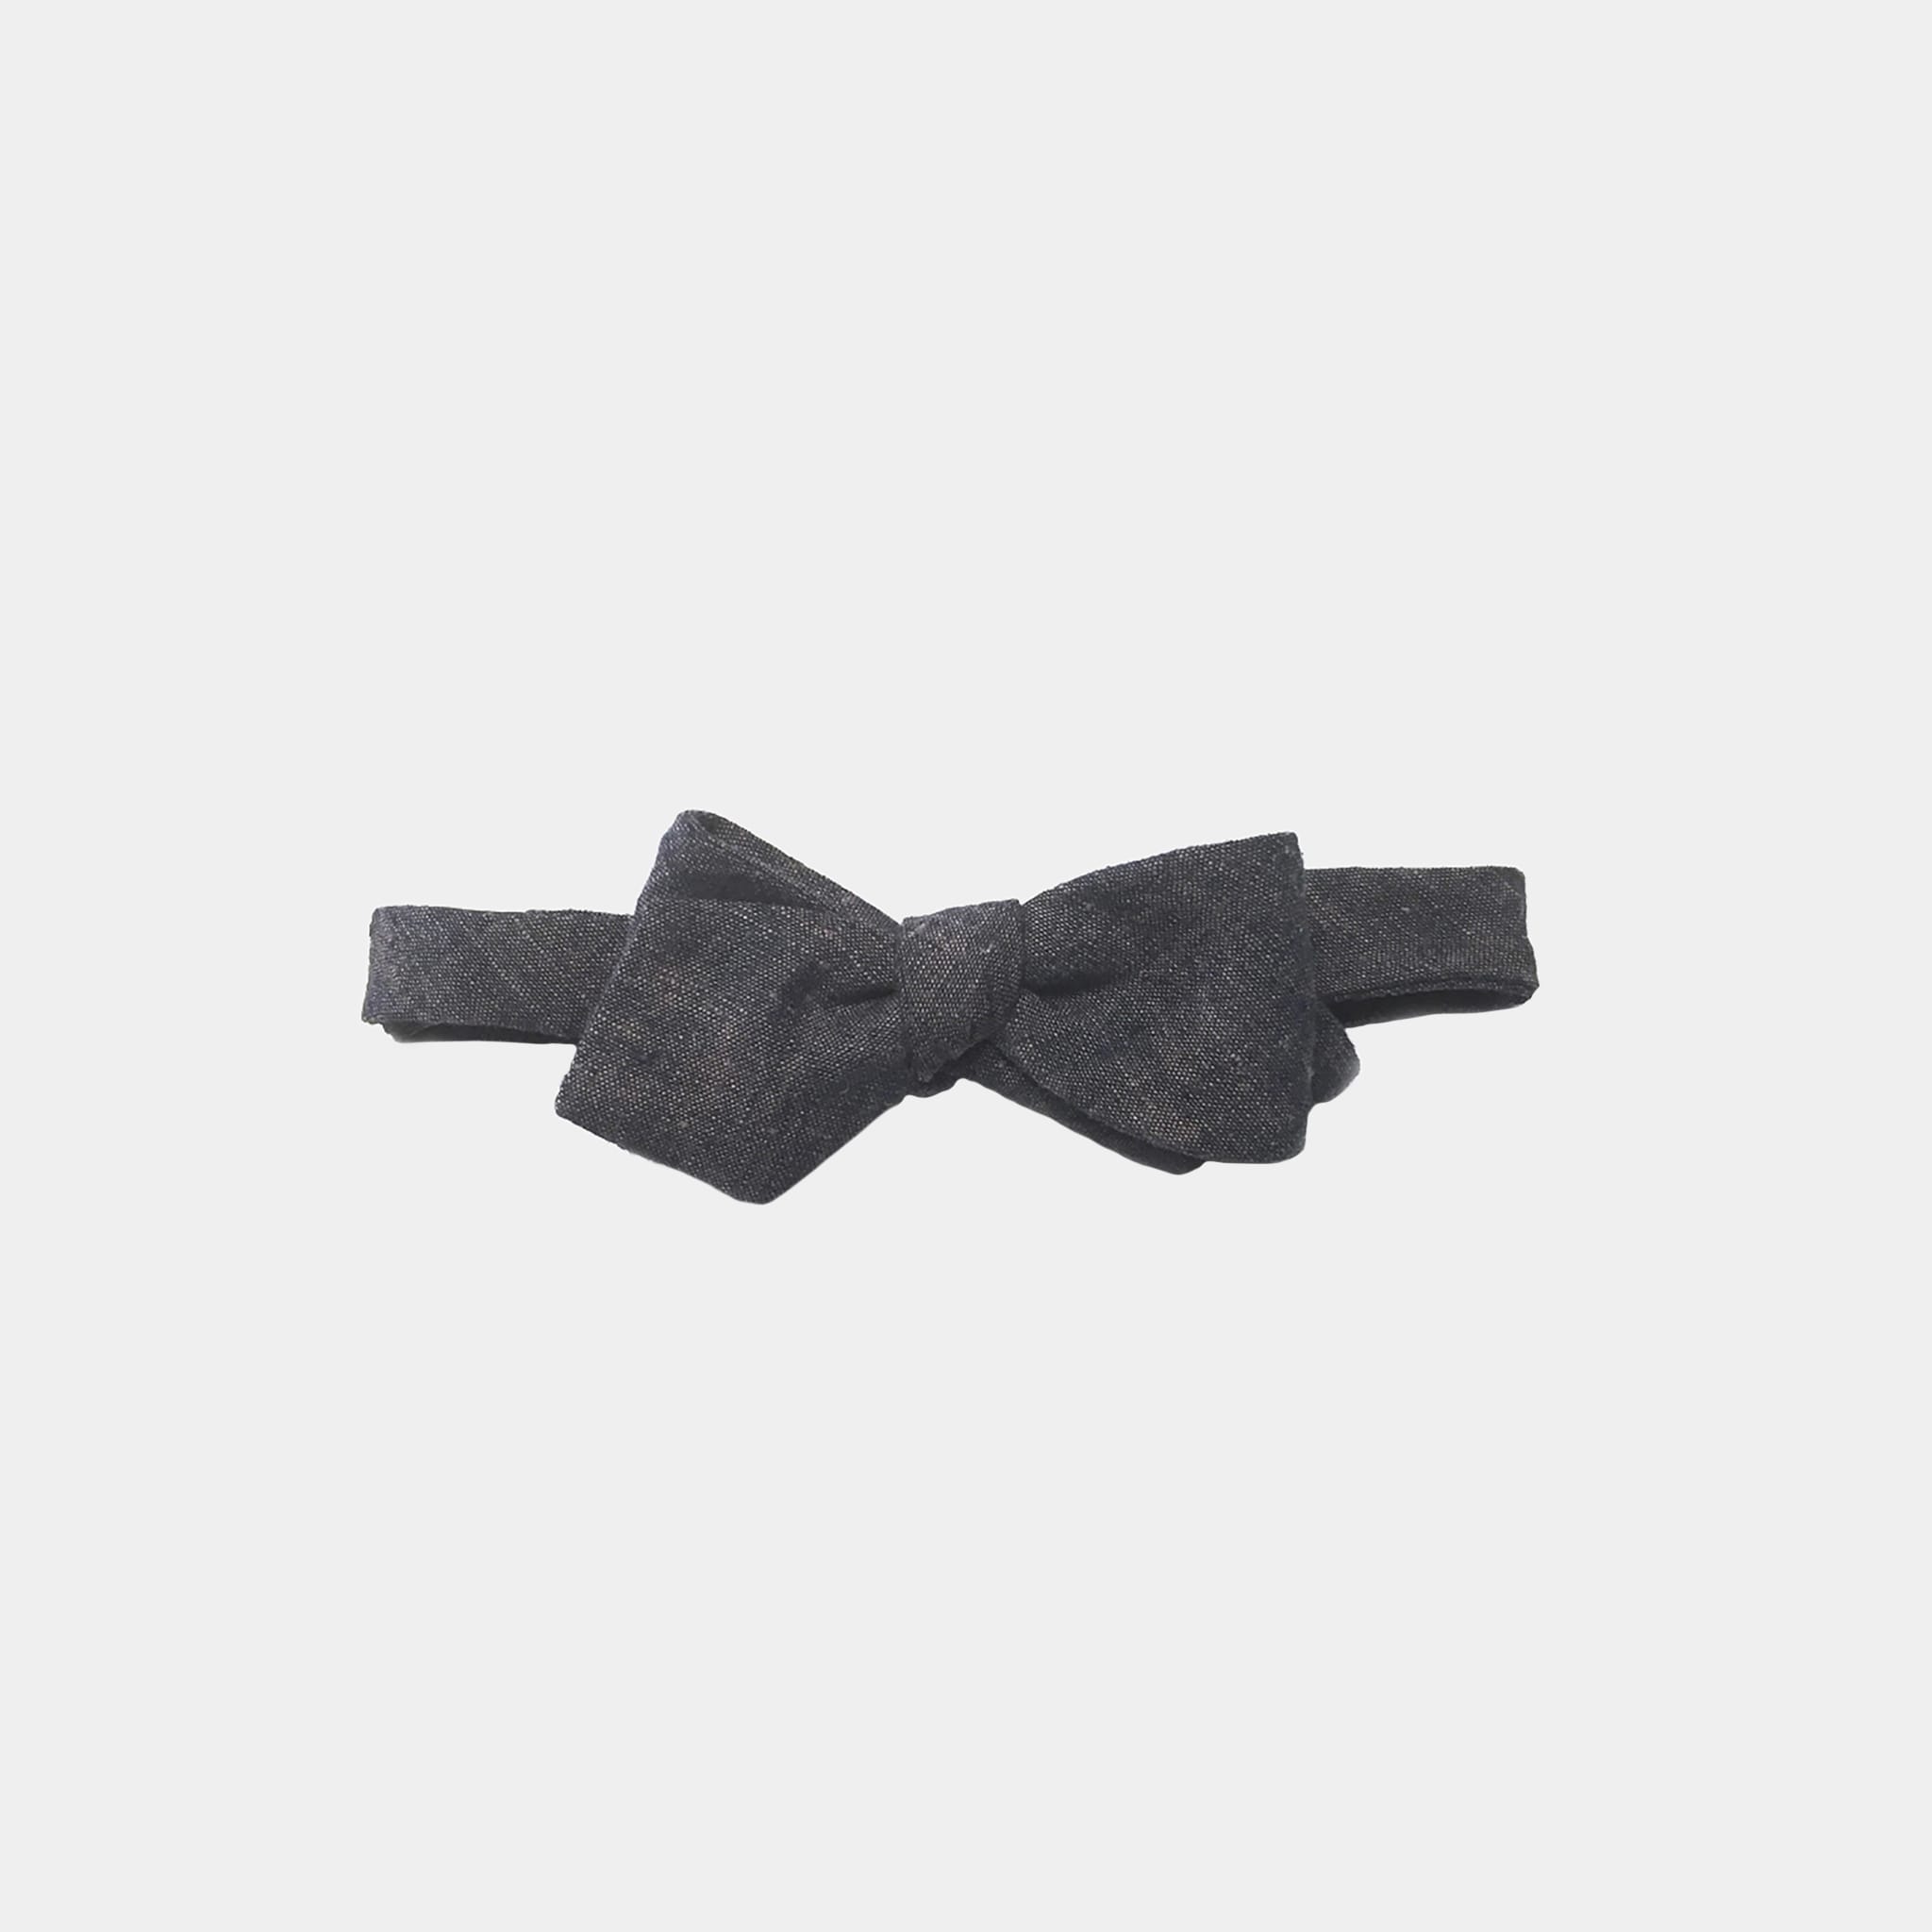 Solid Bow Tie